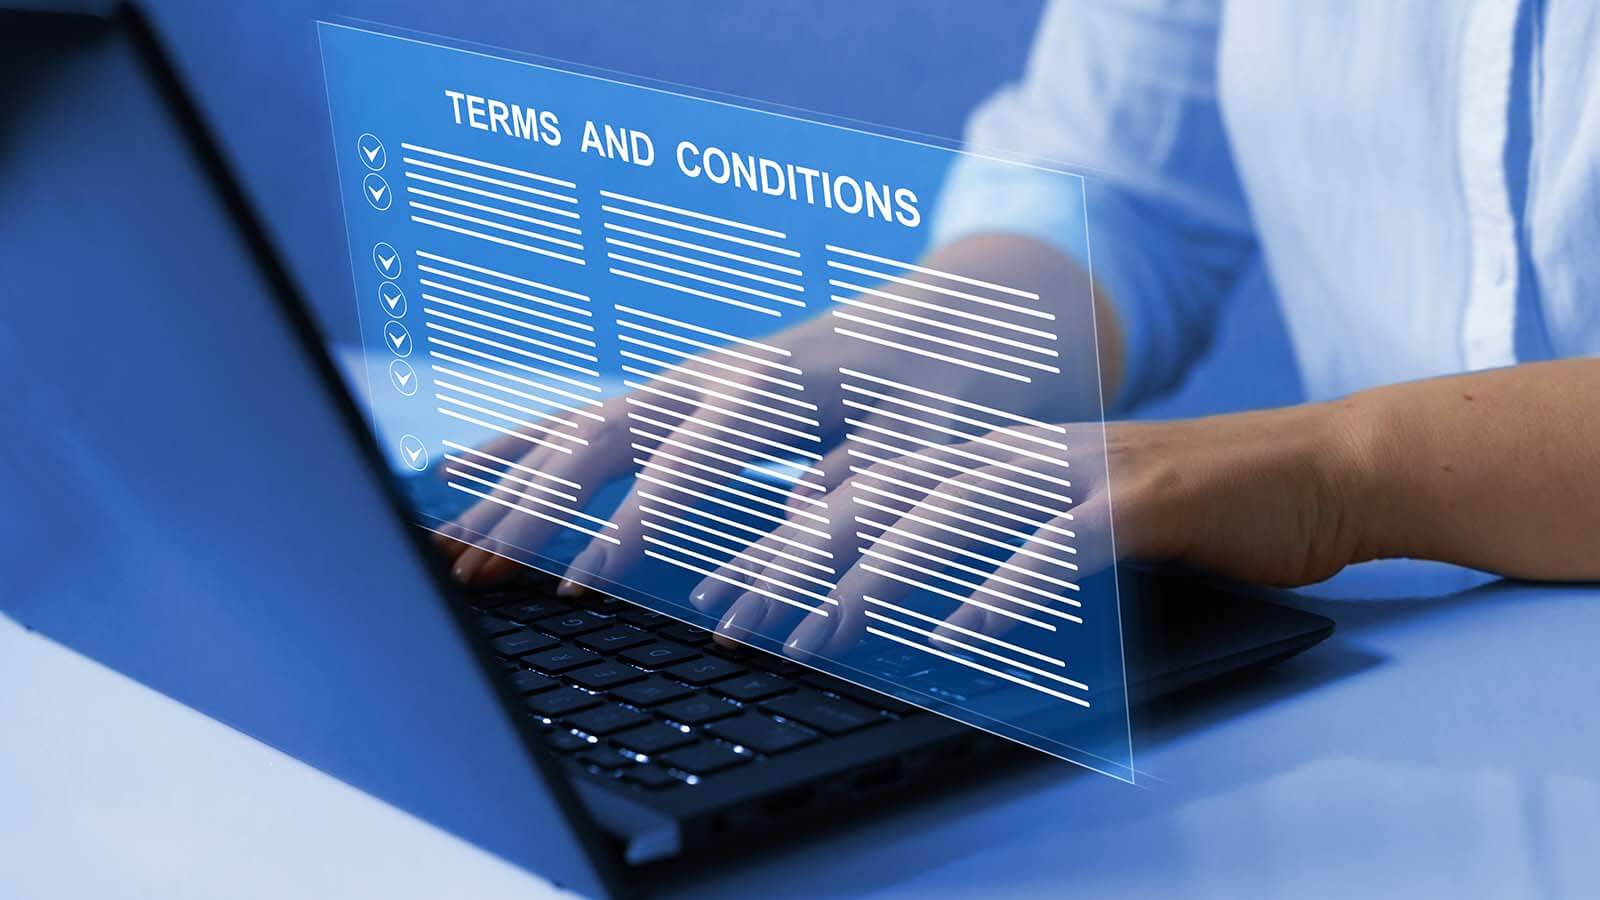 Ignoring the Terms and Conditions